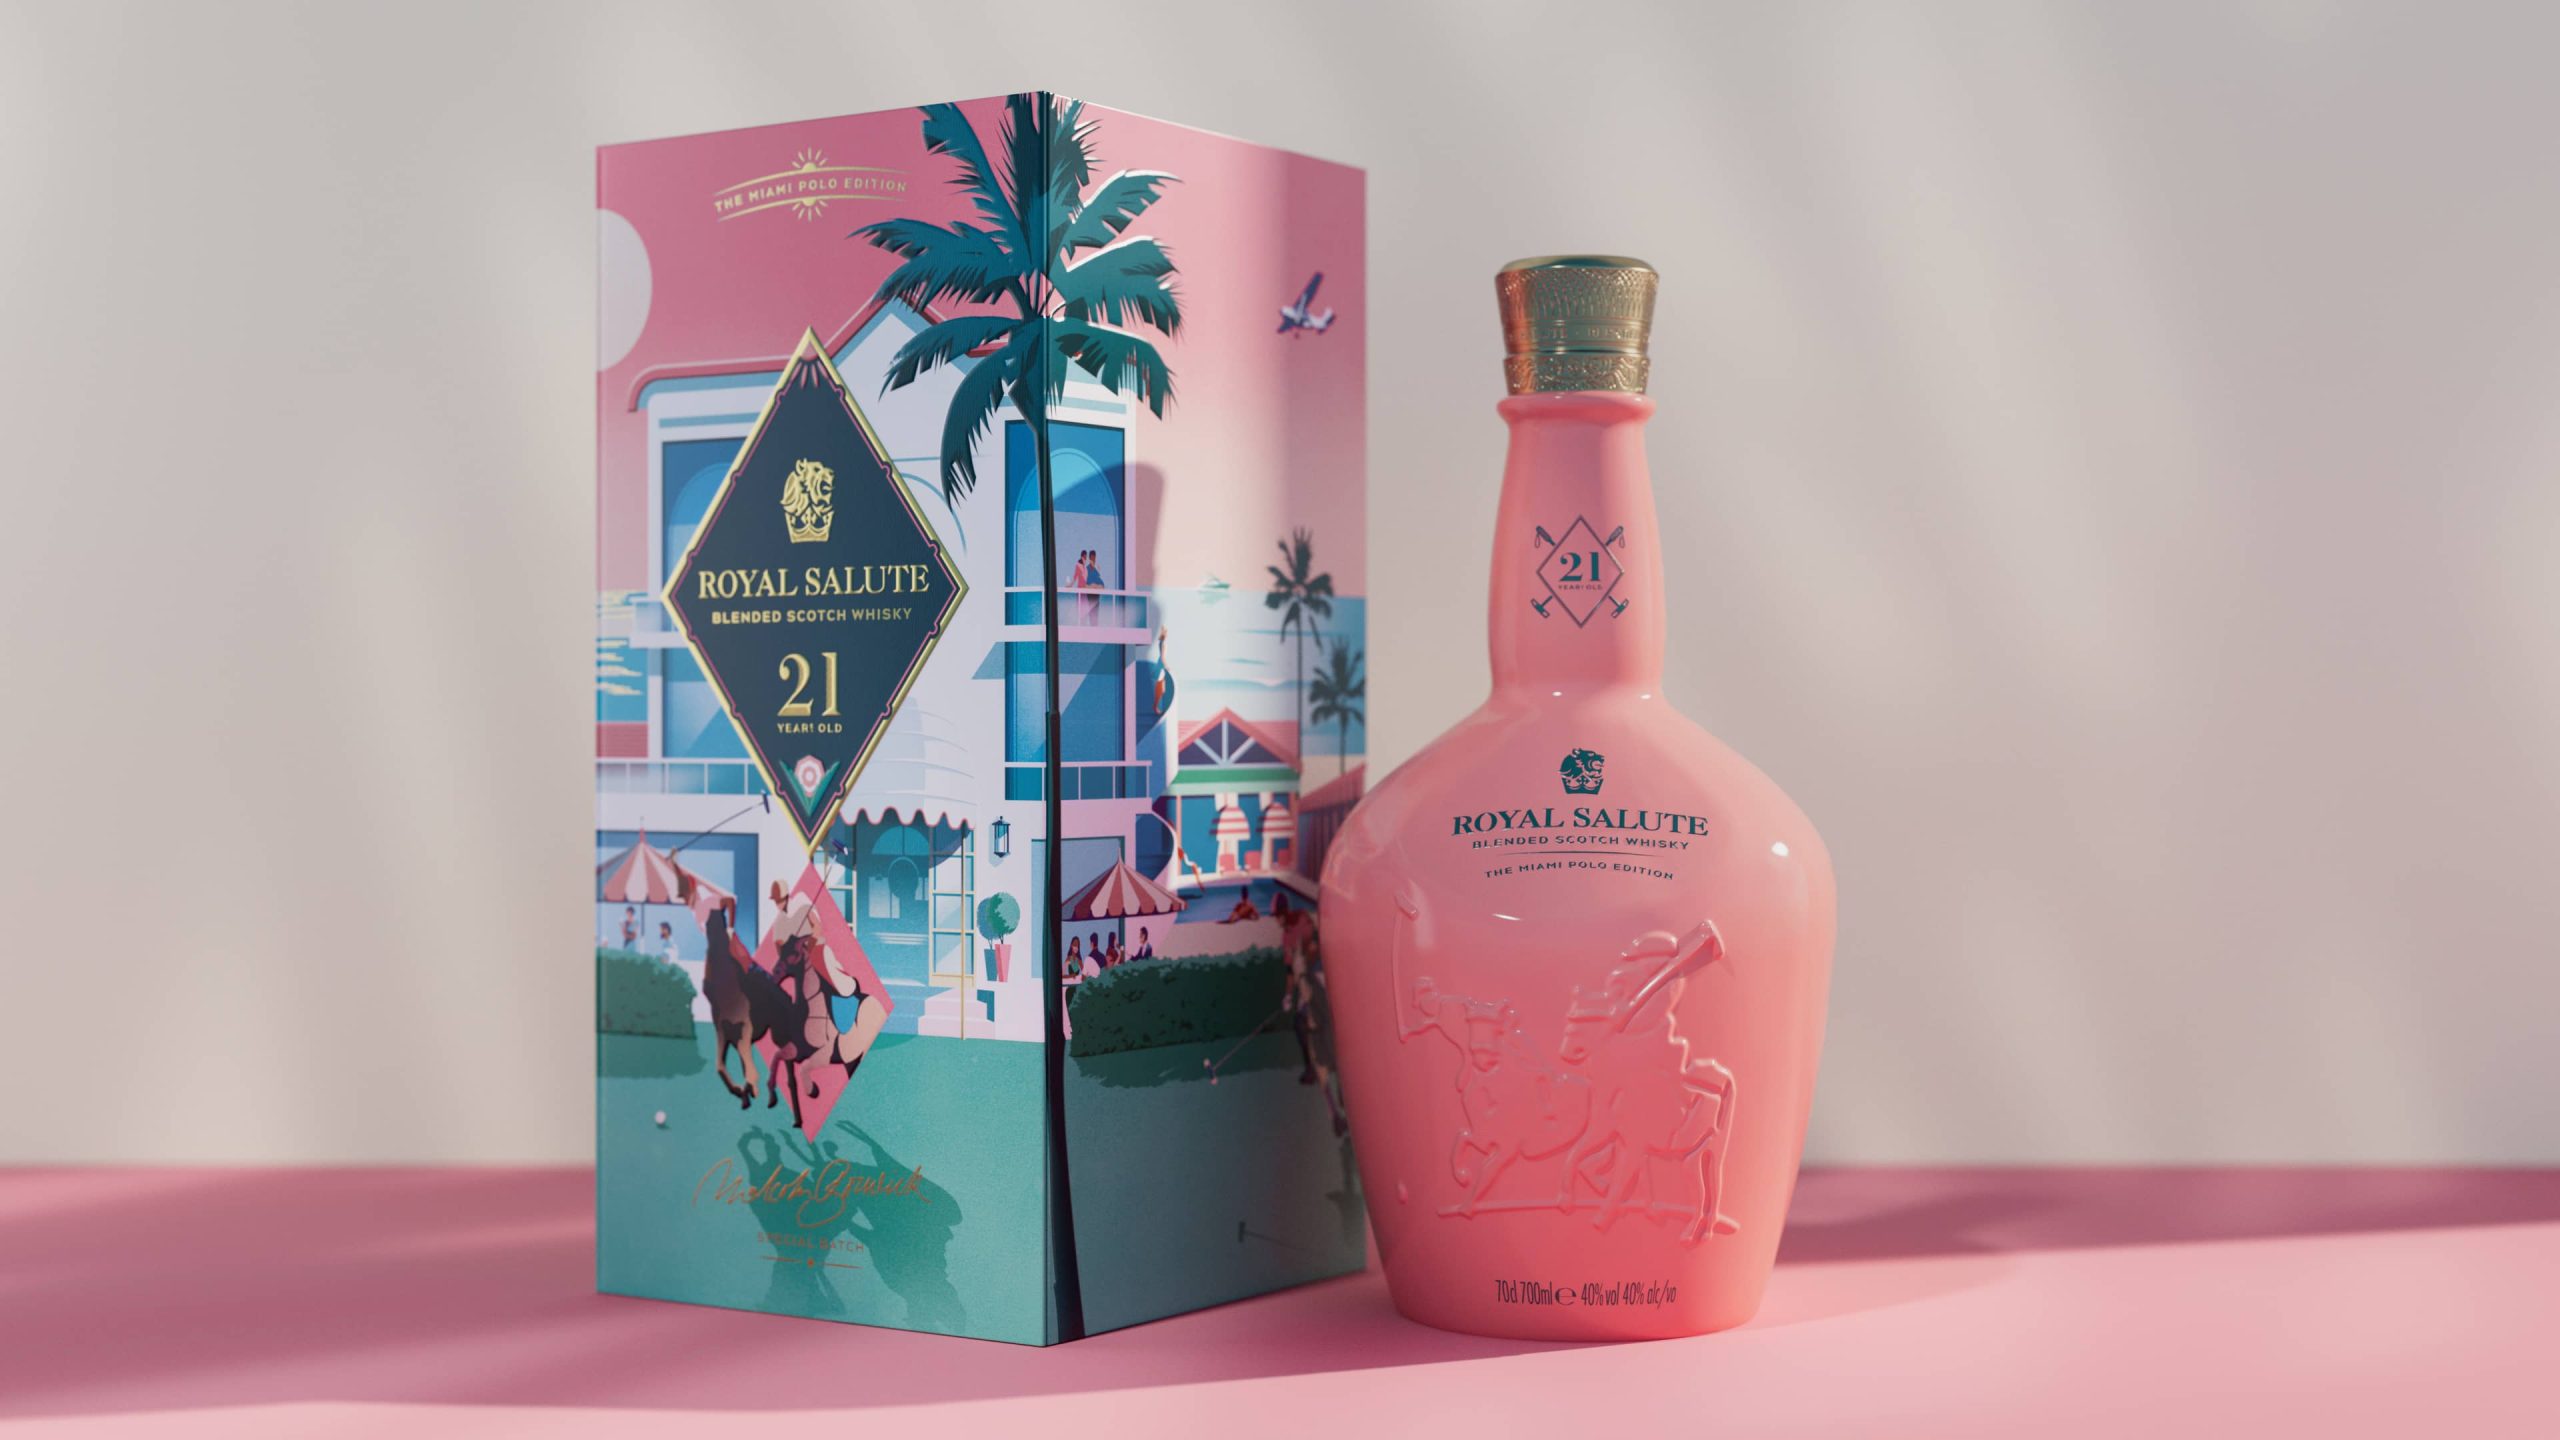 This Limited-Edition Pink Bottle of Royal Salute Whisky Has Us Jonesing for Miami Beaches